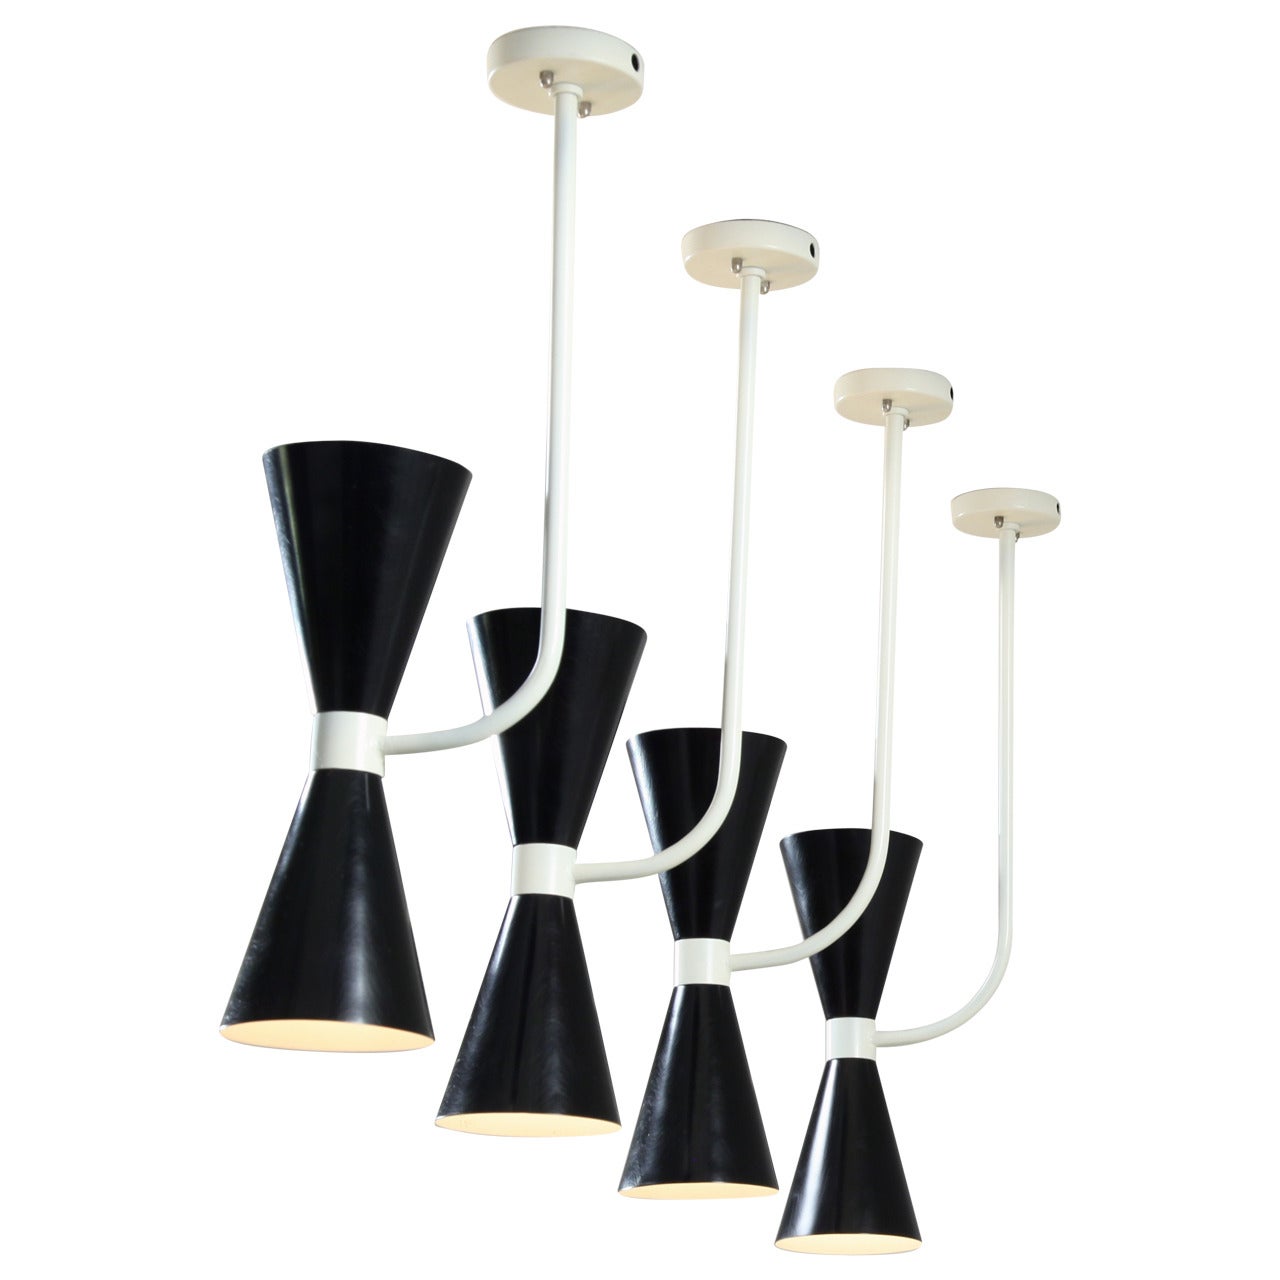 Set of Six Italian Metal Diabolo Wall or Pendant Lamps in Stilnovo Manner, 1950s For Sale